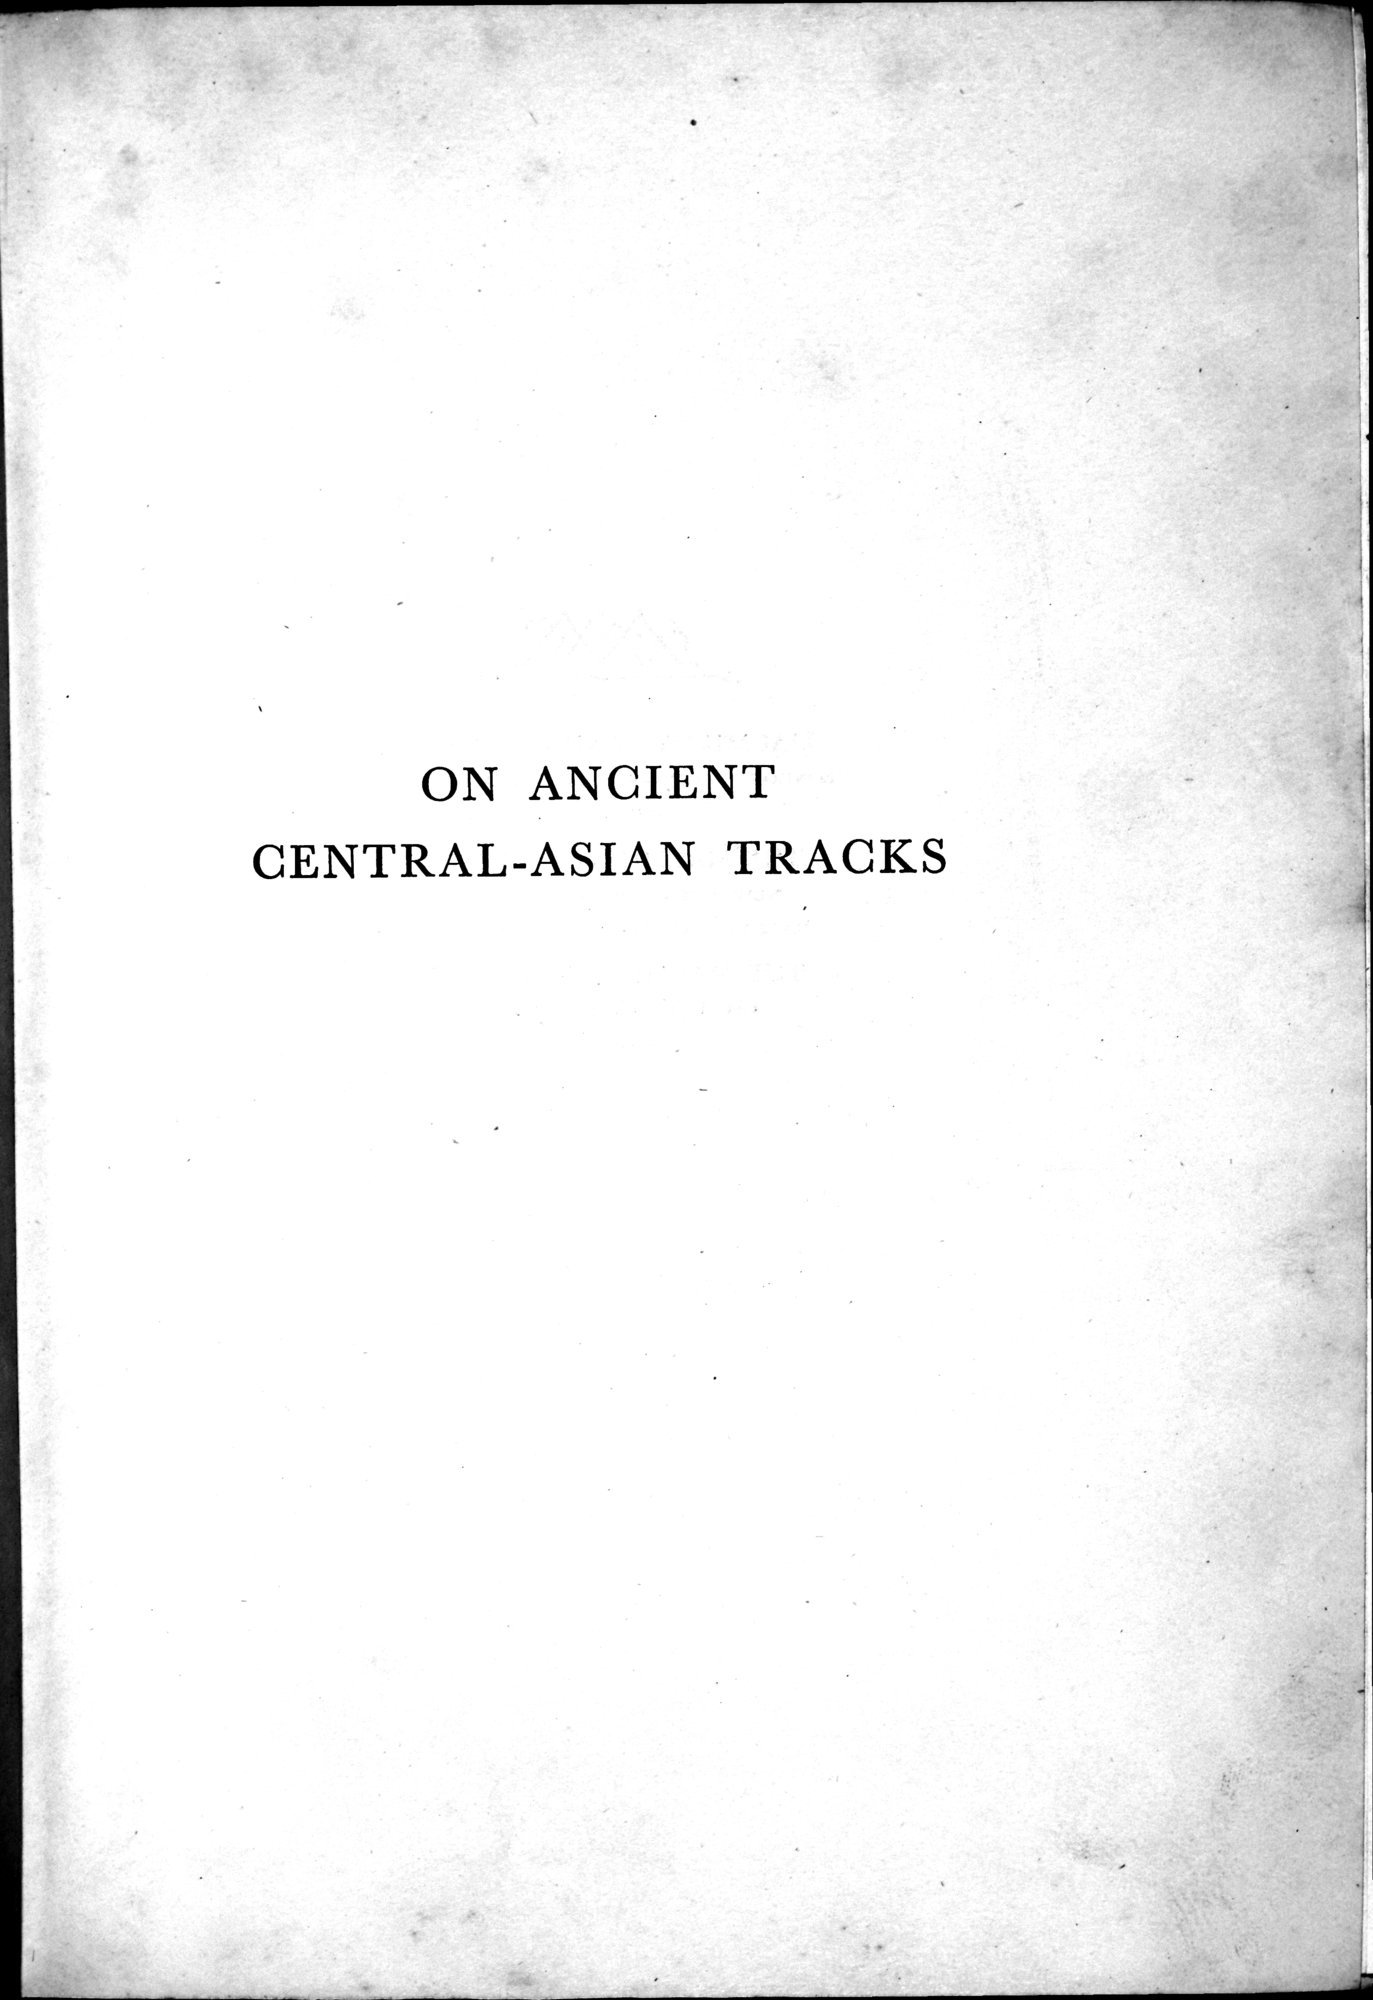 On Ancient Central-Asian Tracks : vol.1 / Page 7 (Grayscale High Resolution Image)